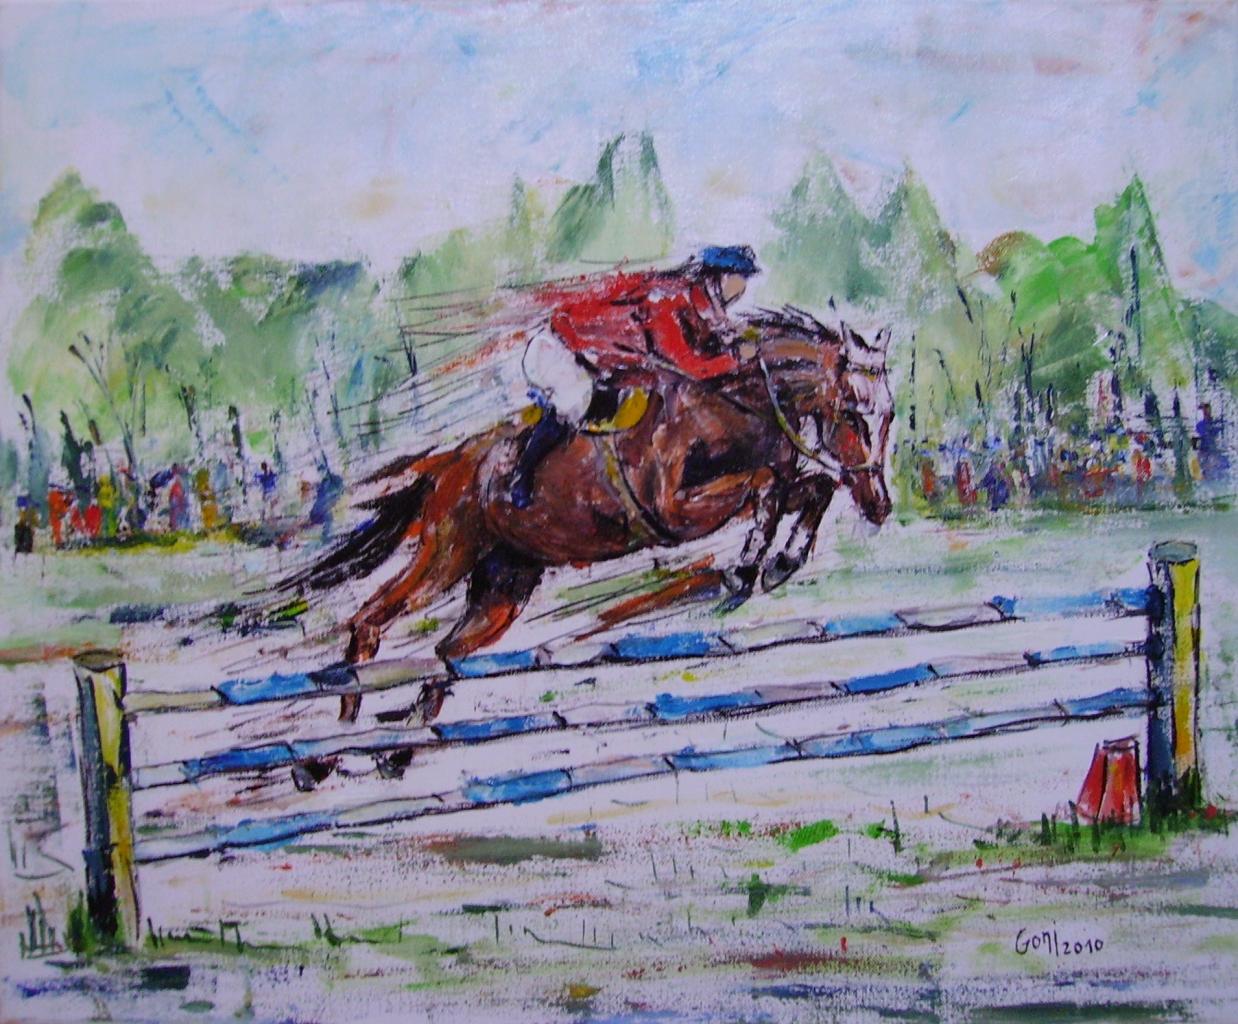 Jumping - 2010 - Acrylique - 63x50